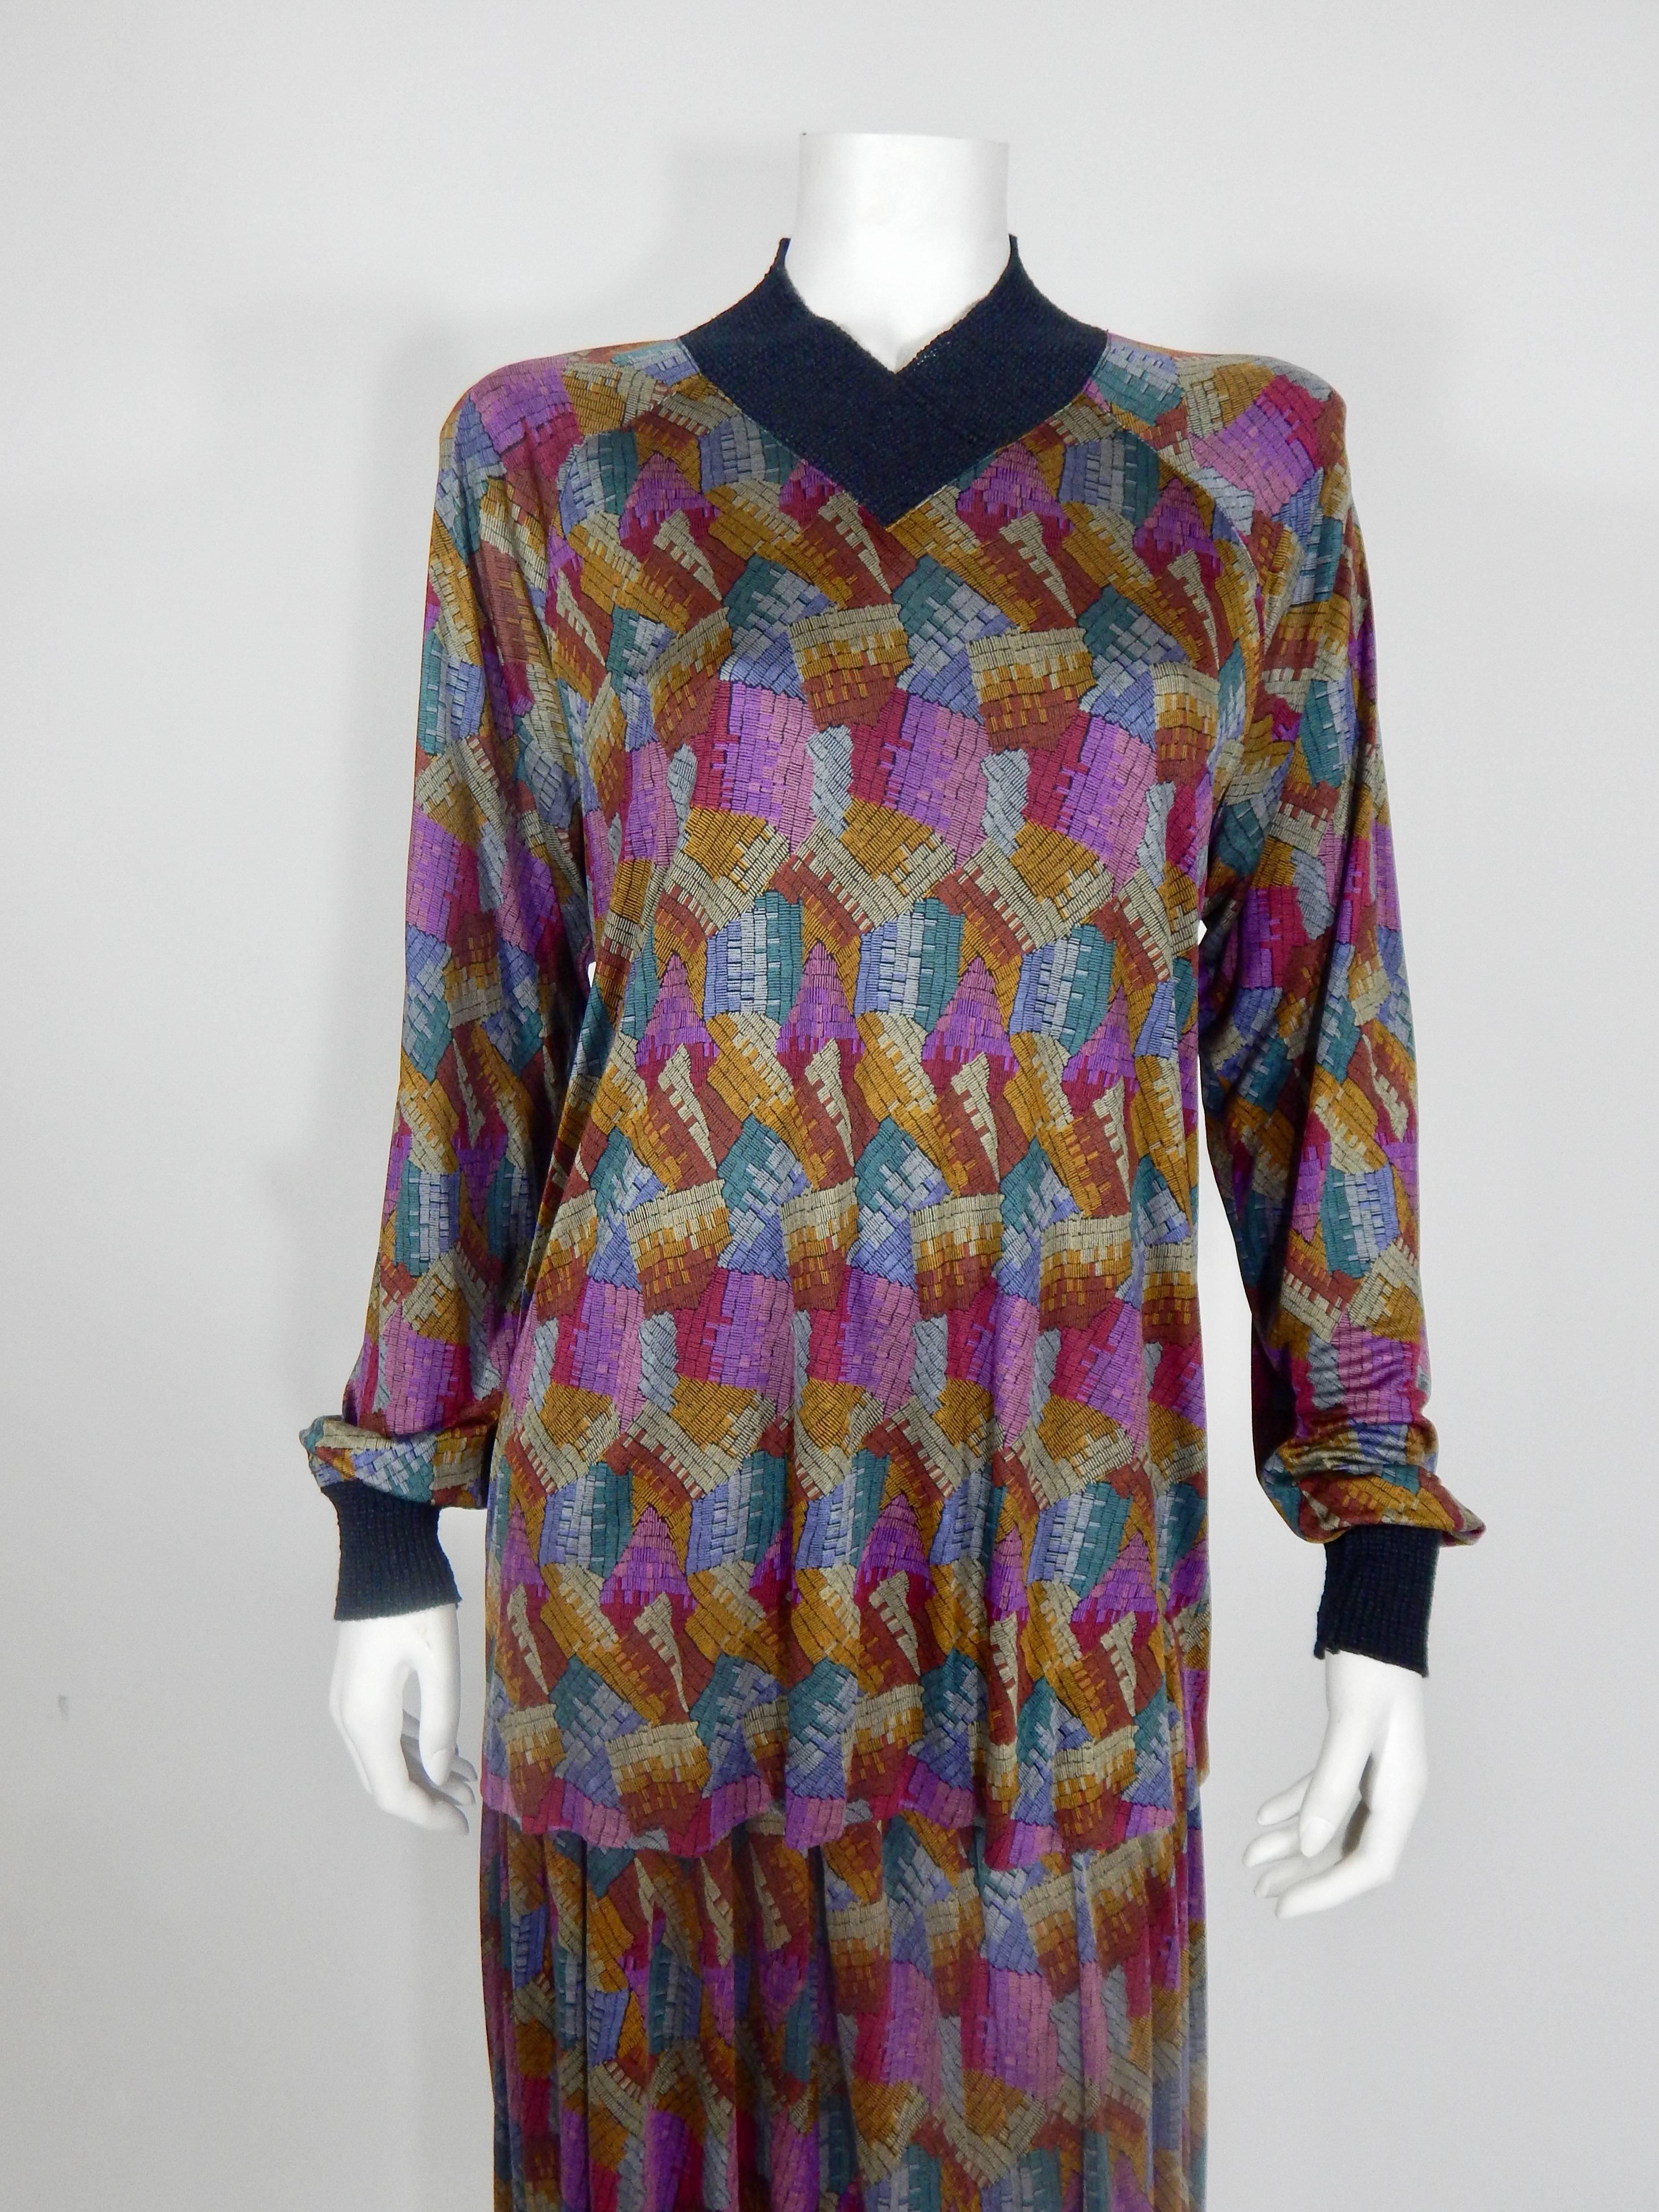 Late 1970s Missoni Dress / Matching Skirt and Top Ensemble. Luxurious 100% Silk Fabric with Black Knit trim at Cuffs and Collar. Skirt is Lined in Silk. Light shoulder pads. Both pieces retain original tags. Tag reads size 46 which converts to US